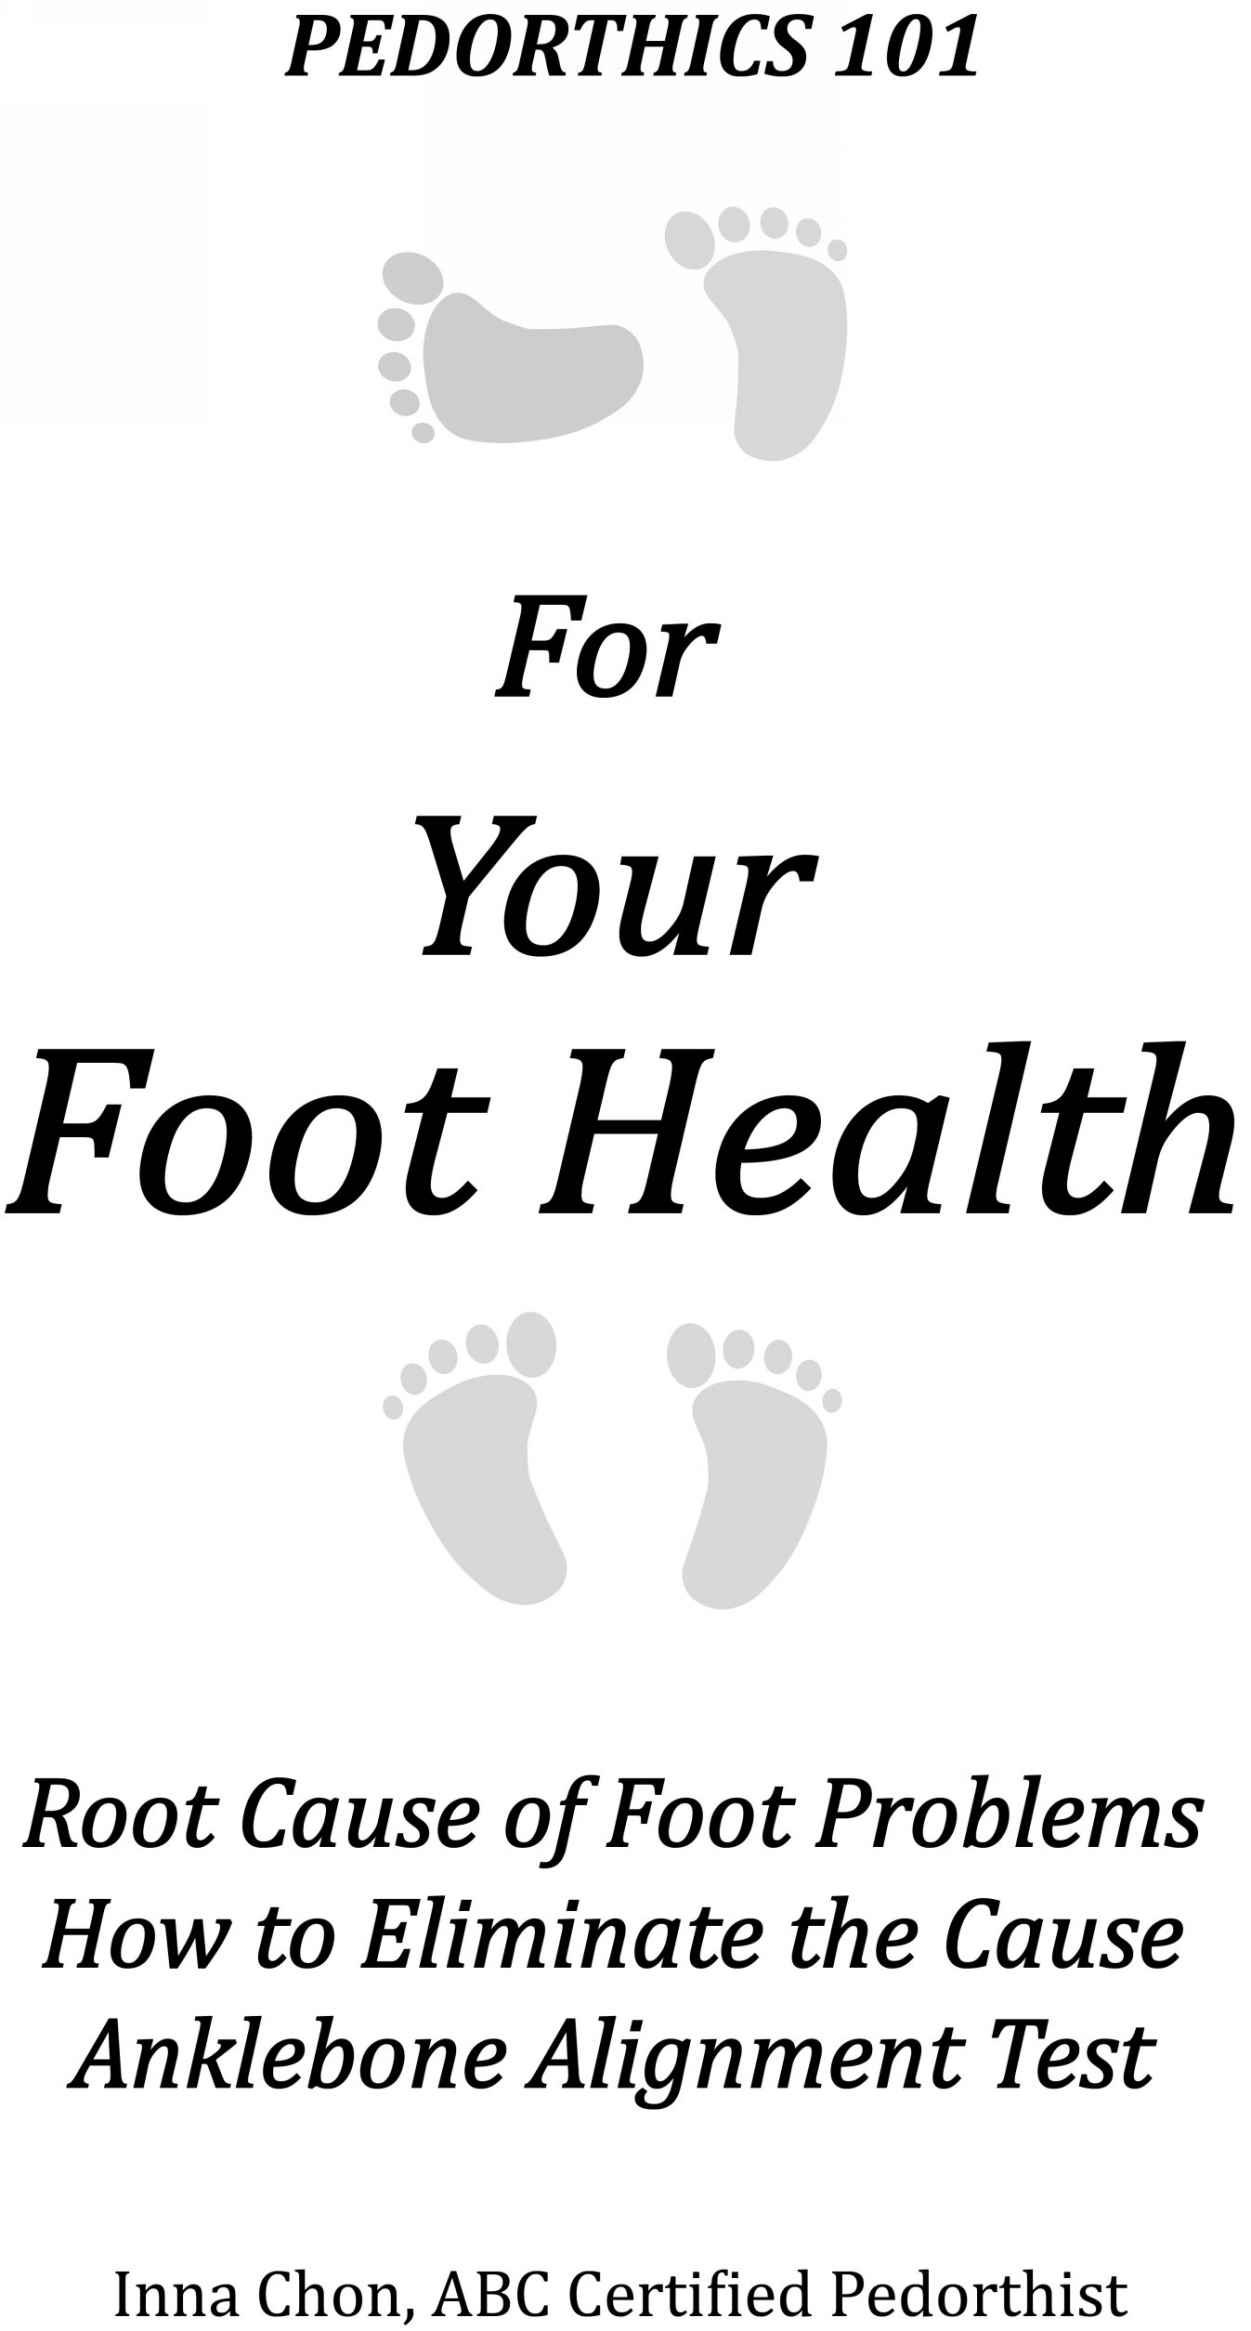 Pedorthics 101 For Your Foot Health Copyright 2017 by Feet Balance Orthotics - photo 1